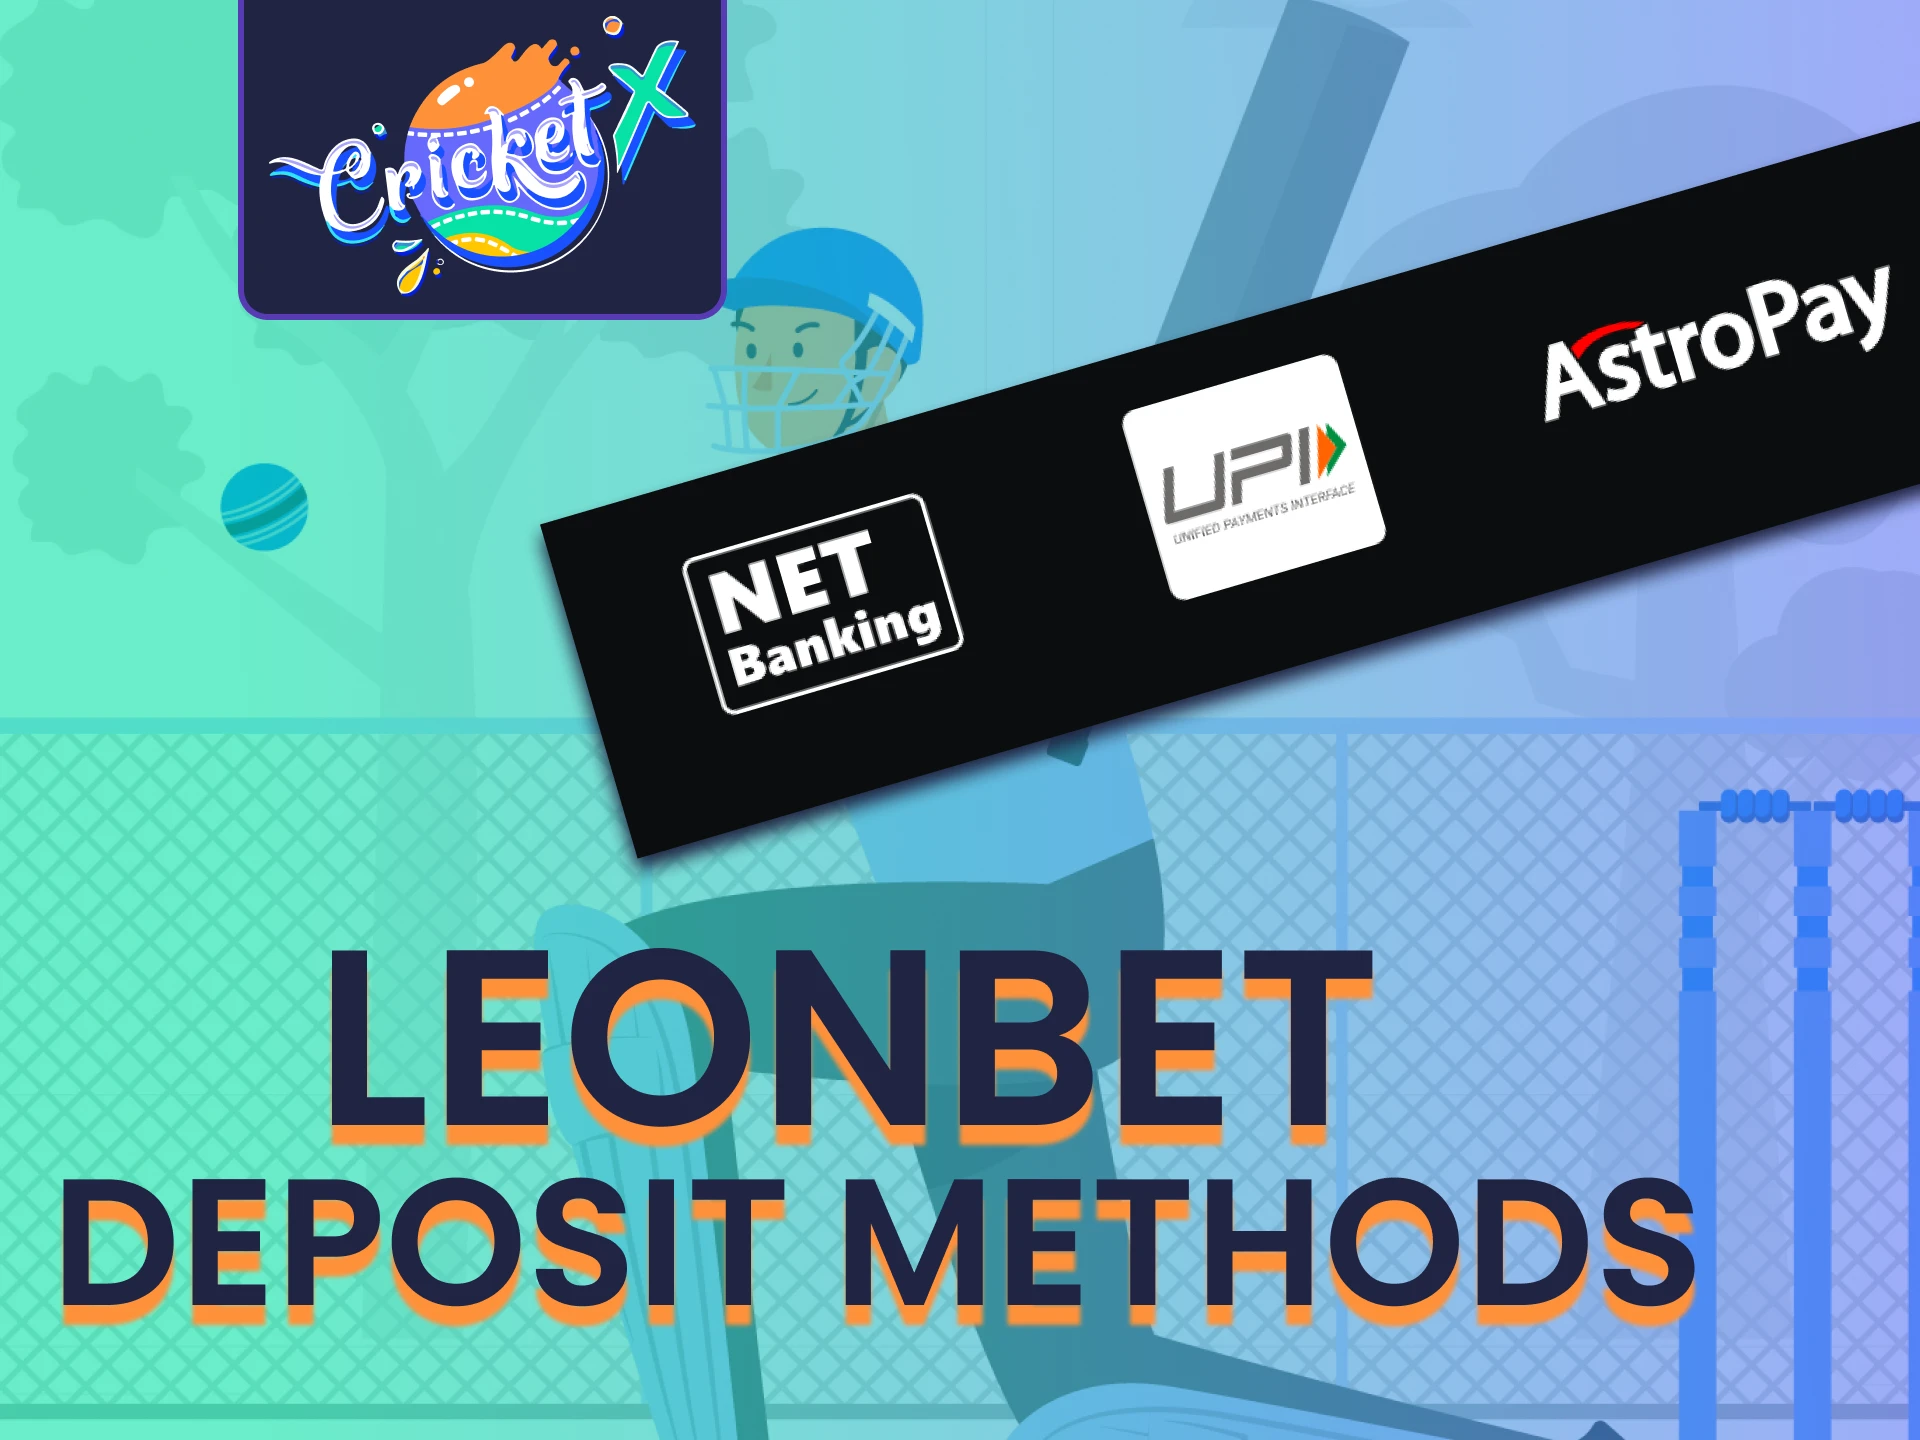 Top up your deposit on Leonbet to play Cricket X.